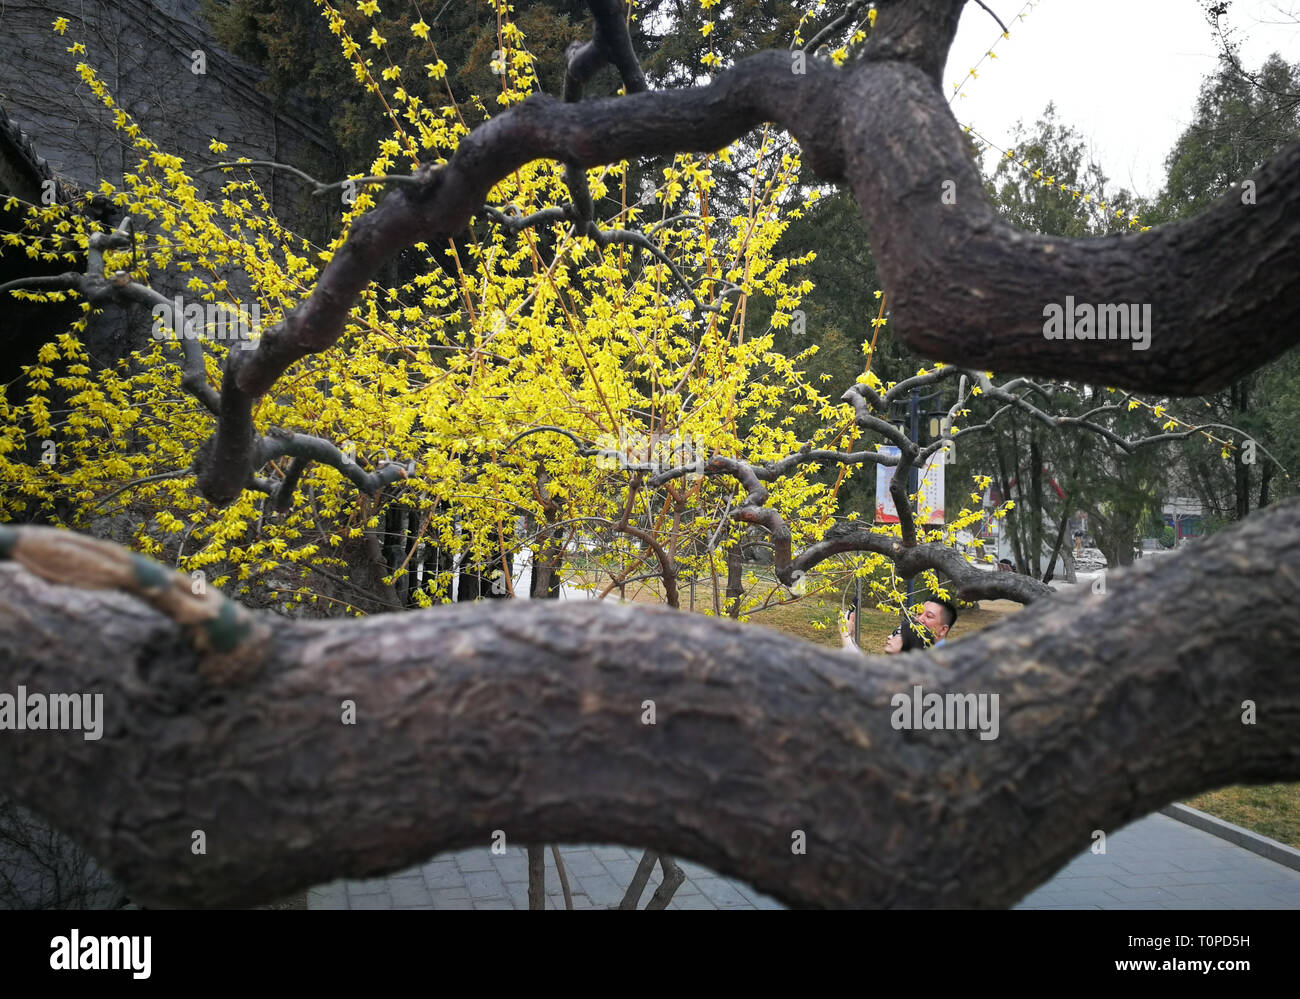 (190321) -- BEIJING, March 21, 2019 (Xinhua) -- Photo taken on March 19, 2019 with a mobile phone shows a tourist taking photos of flowers at Ritan Park in Beijing, capital of China. (Xinhua/Meng Chenguang) Stock Photo